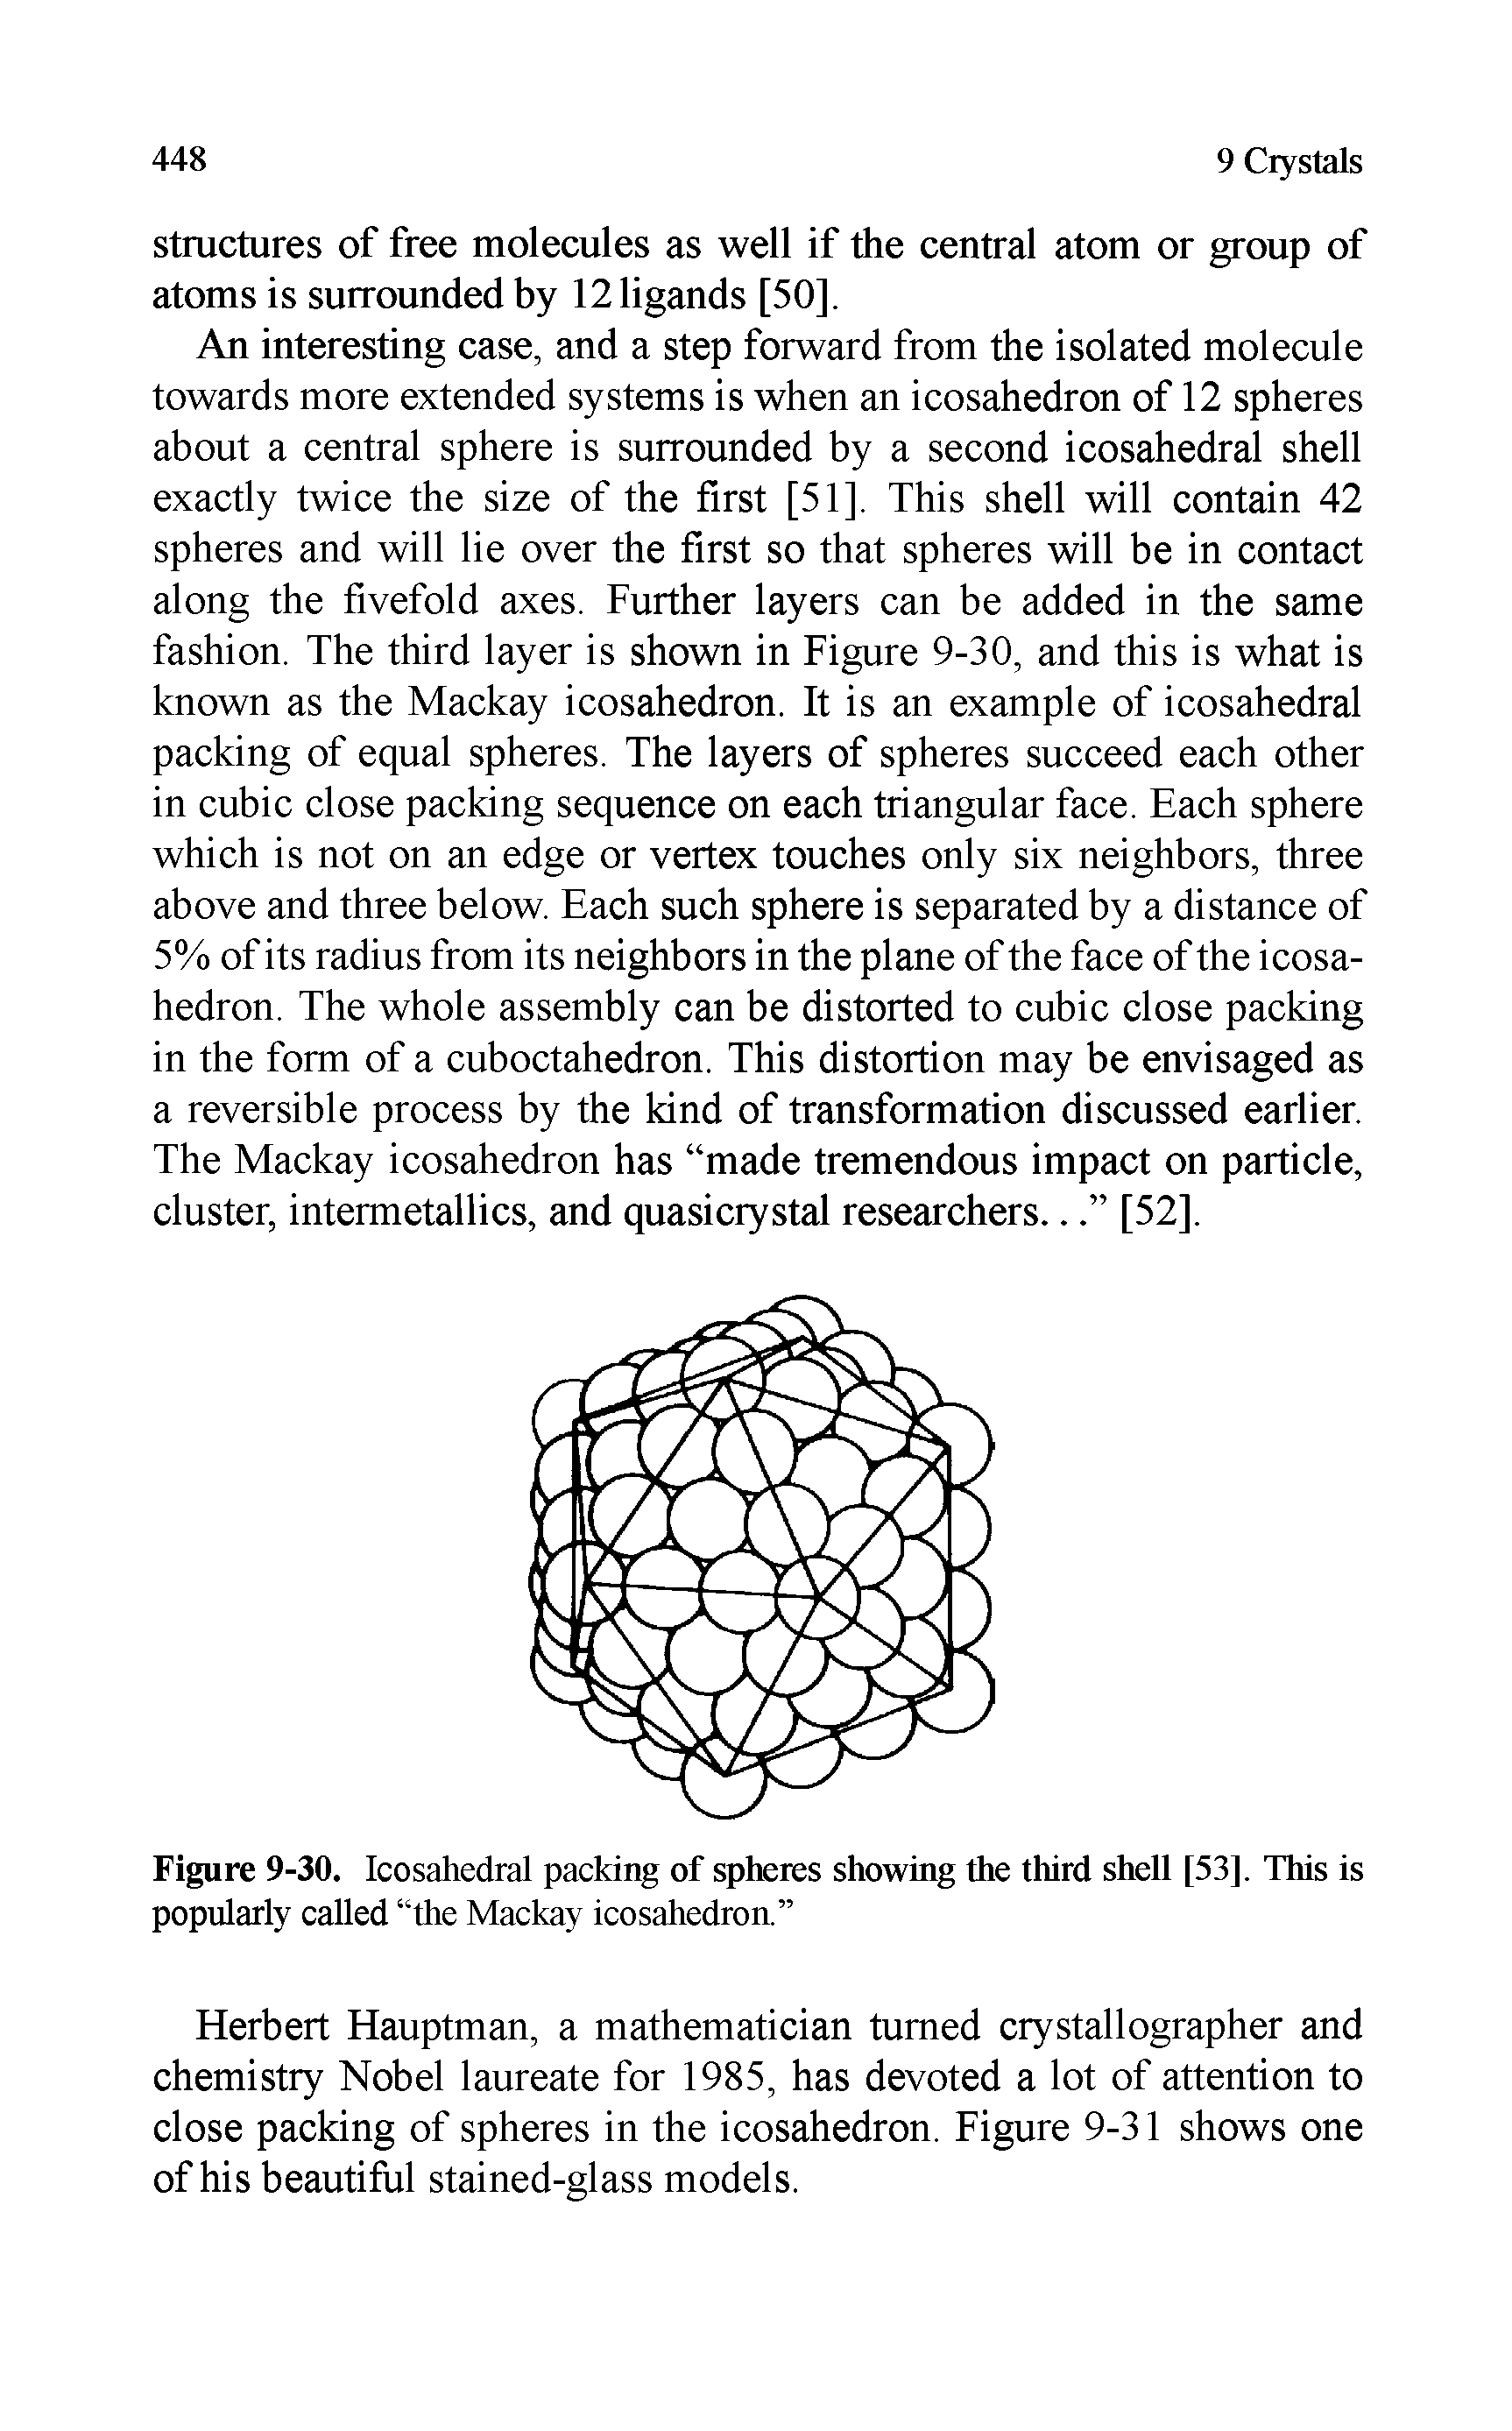 Figure 9-30. Icosahedral packing of spheres showing the third shell [53], This is popularly called the Mackay icosahedron. ...